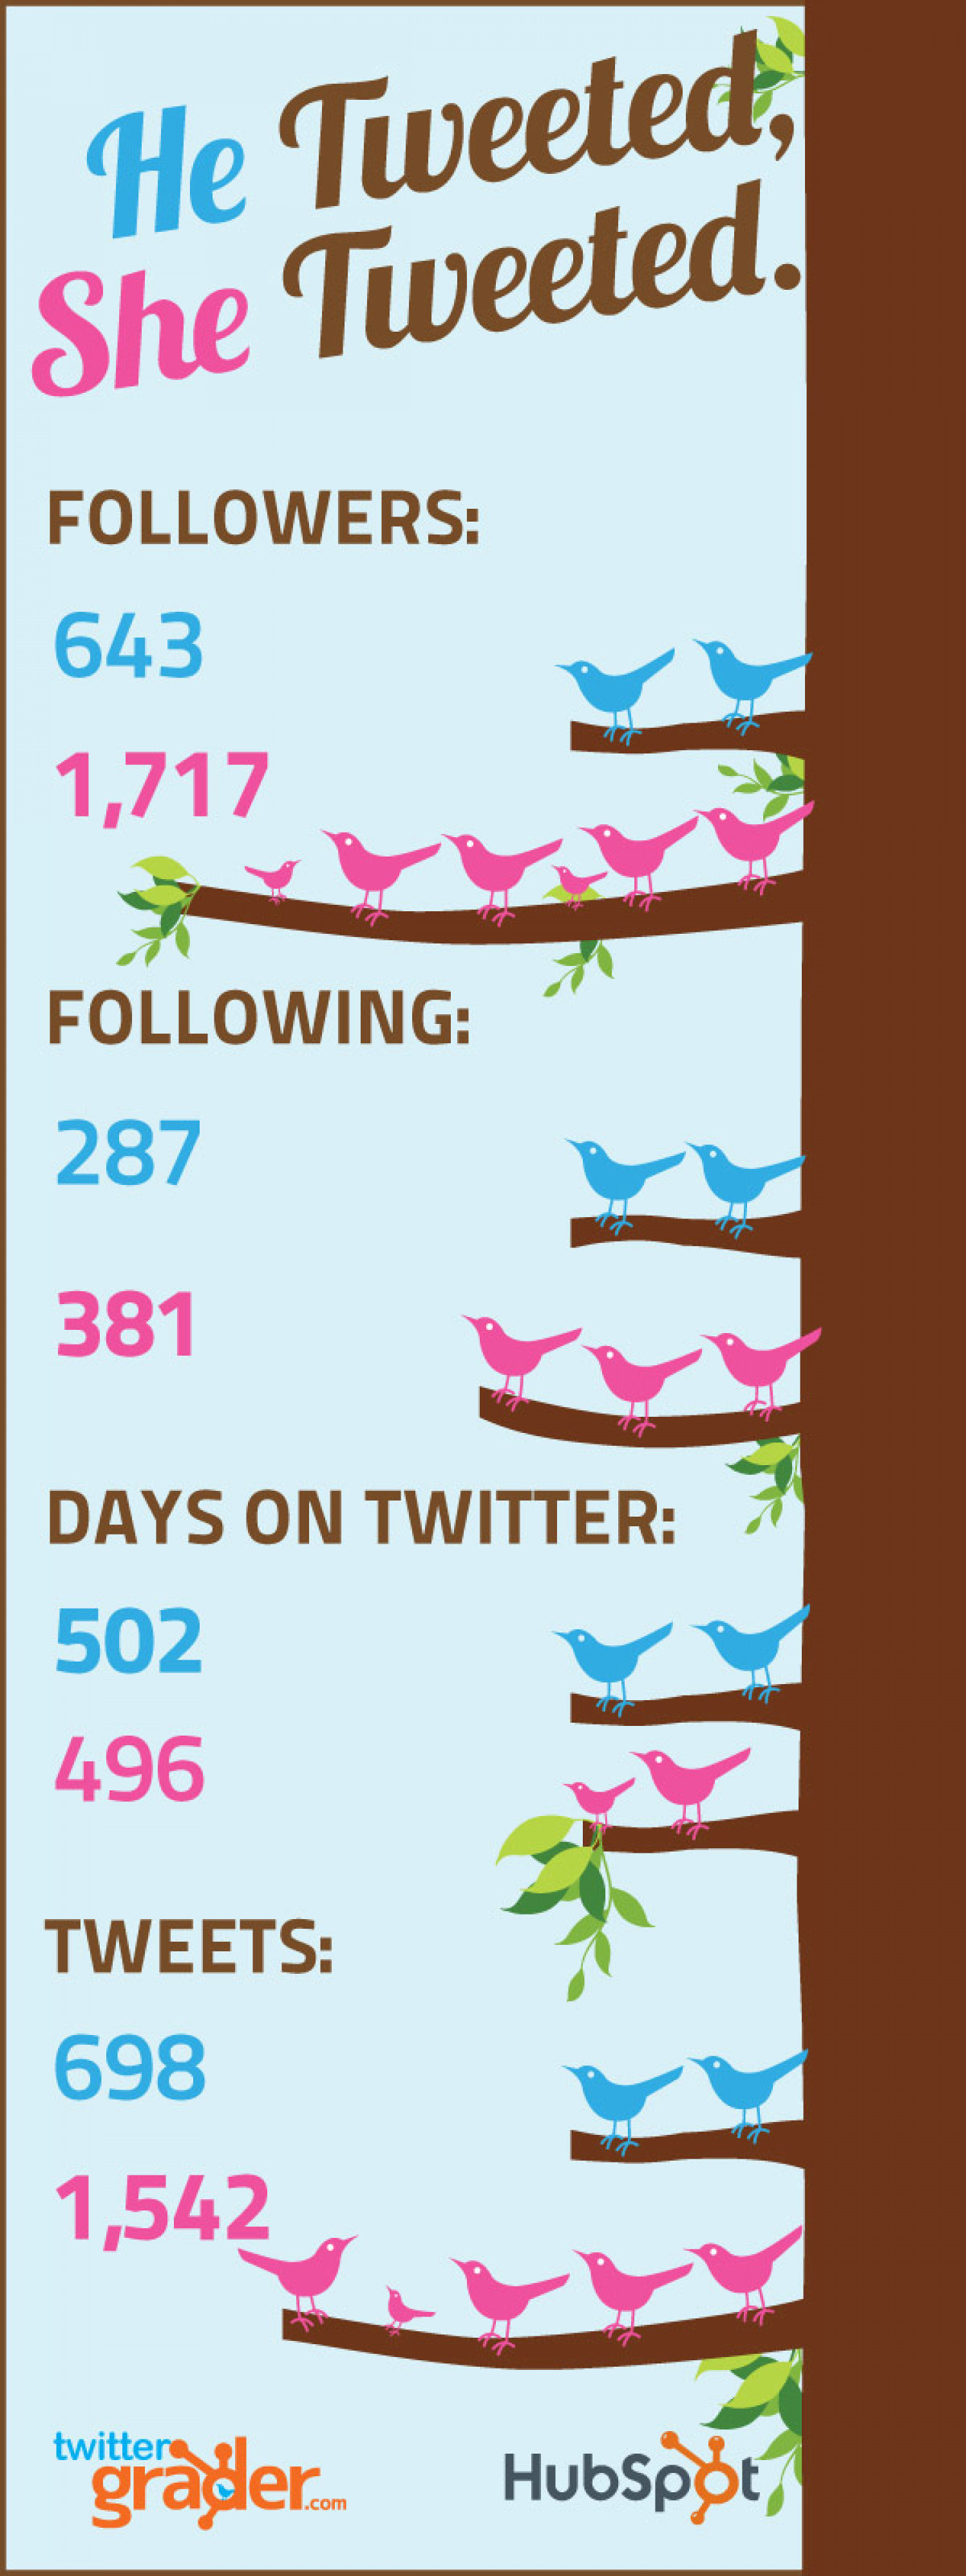 He Tweeted, She Tweeted. Infographic